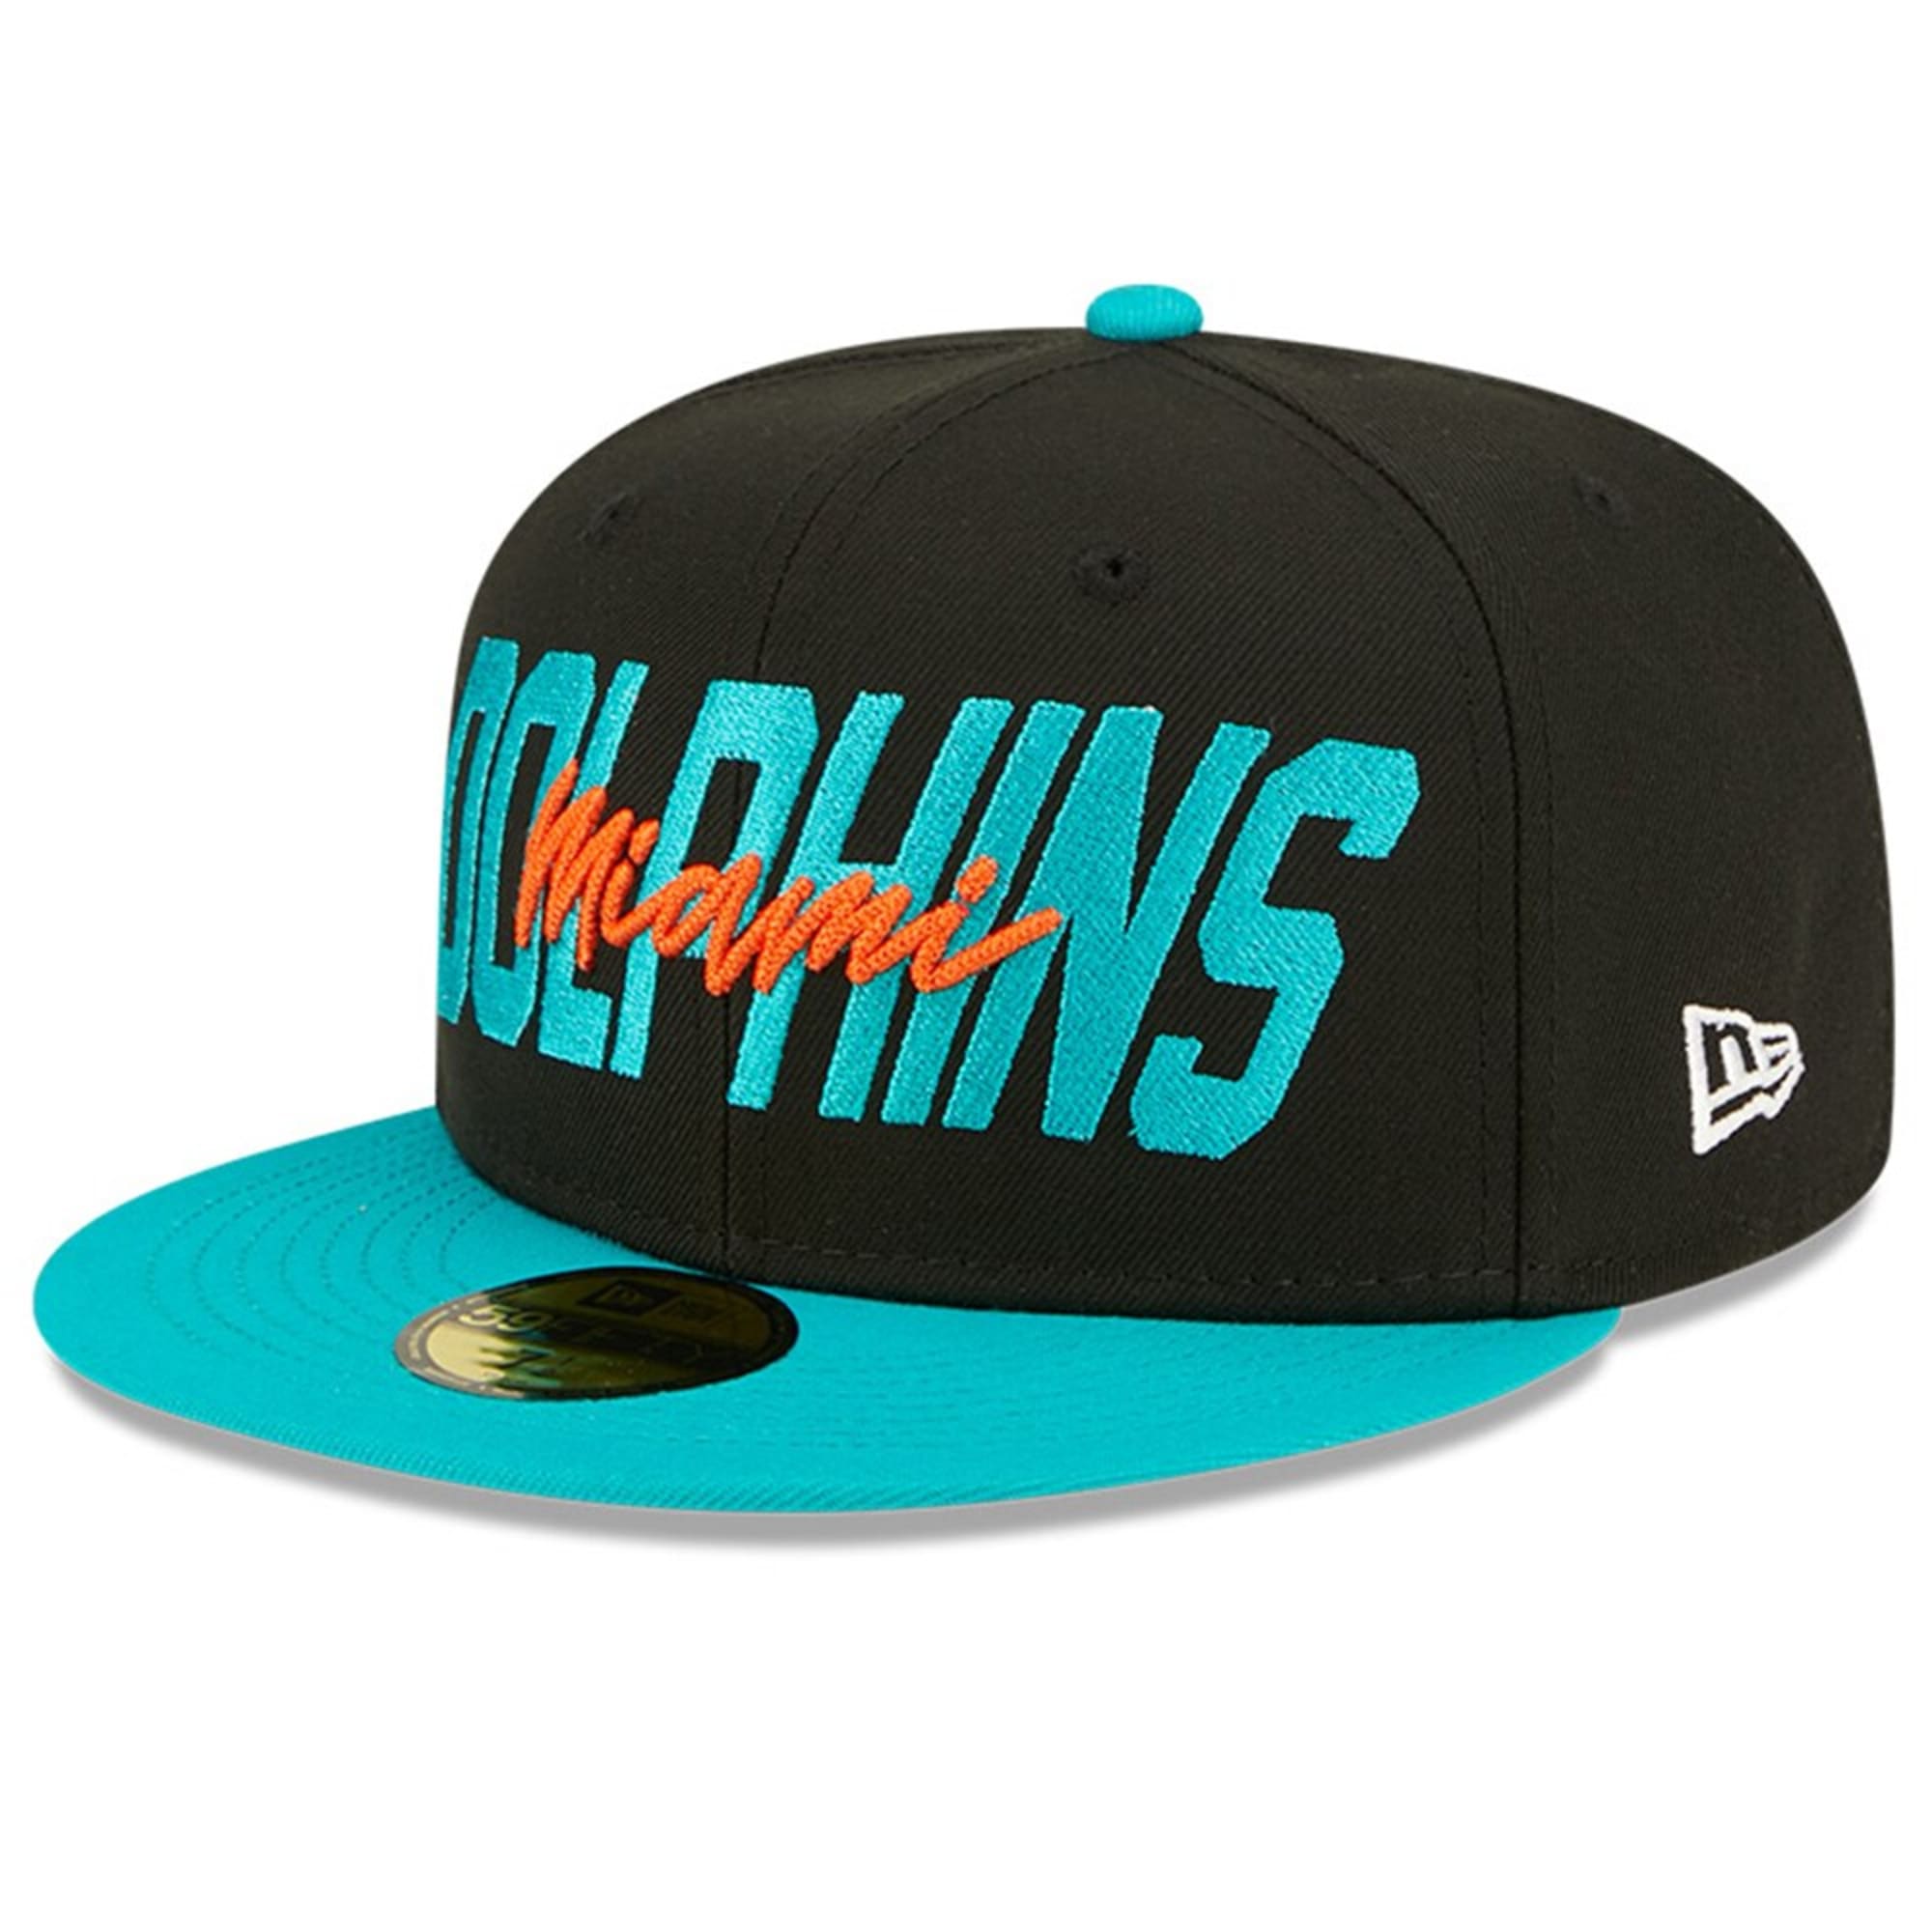 NFL Draft 2022 Order your Miami Dolphins Draft hat today